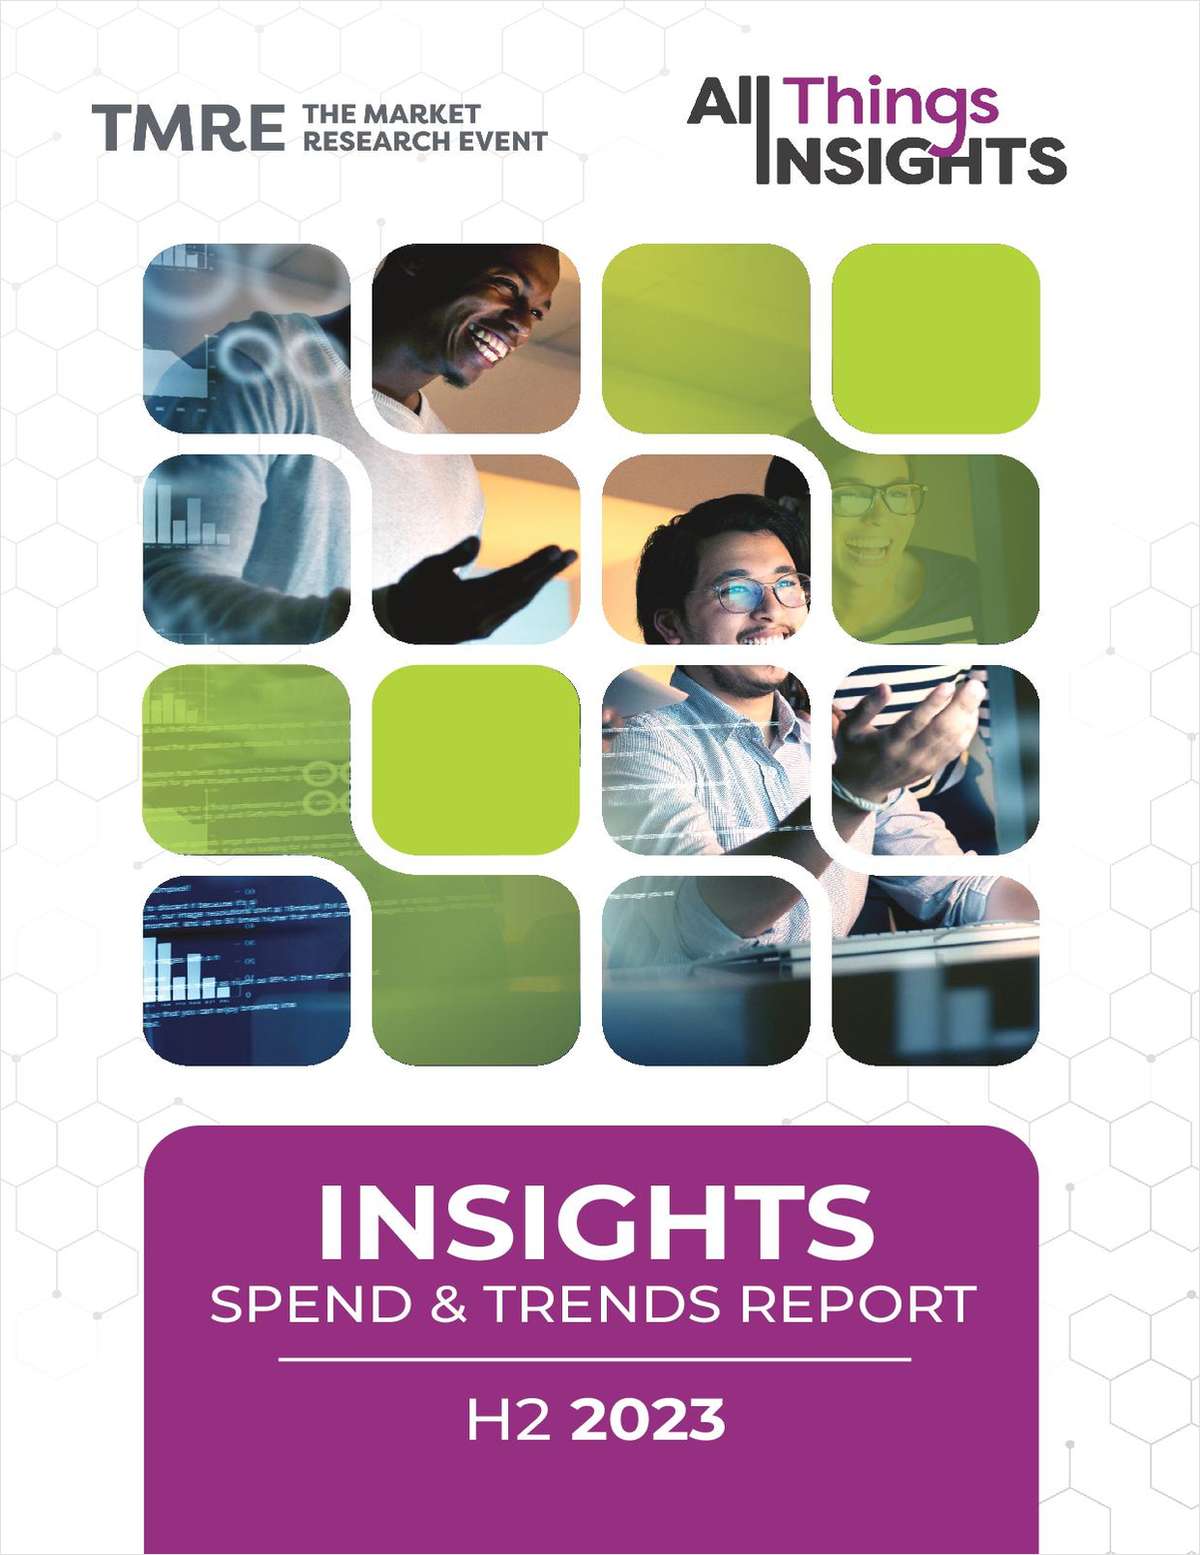 H2 2023 Insights Spend & Trends Report